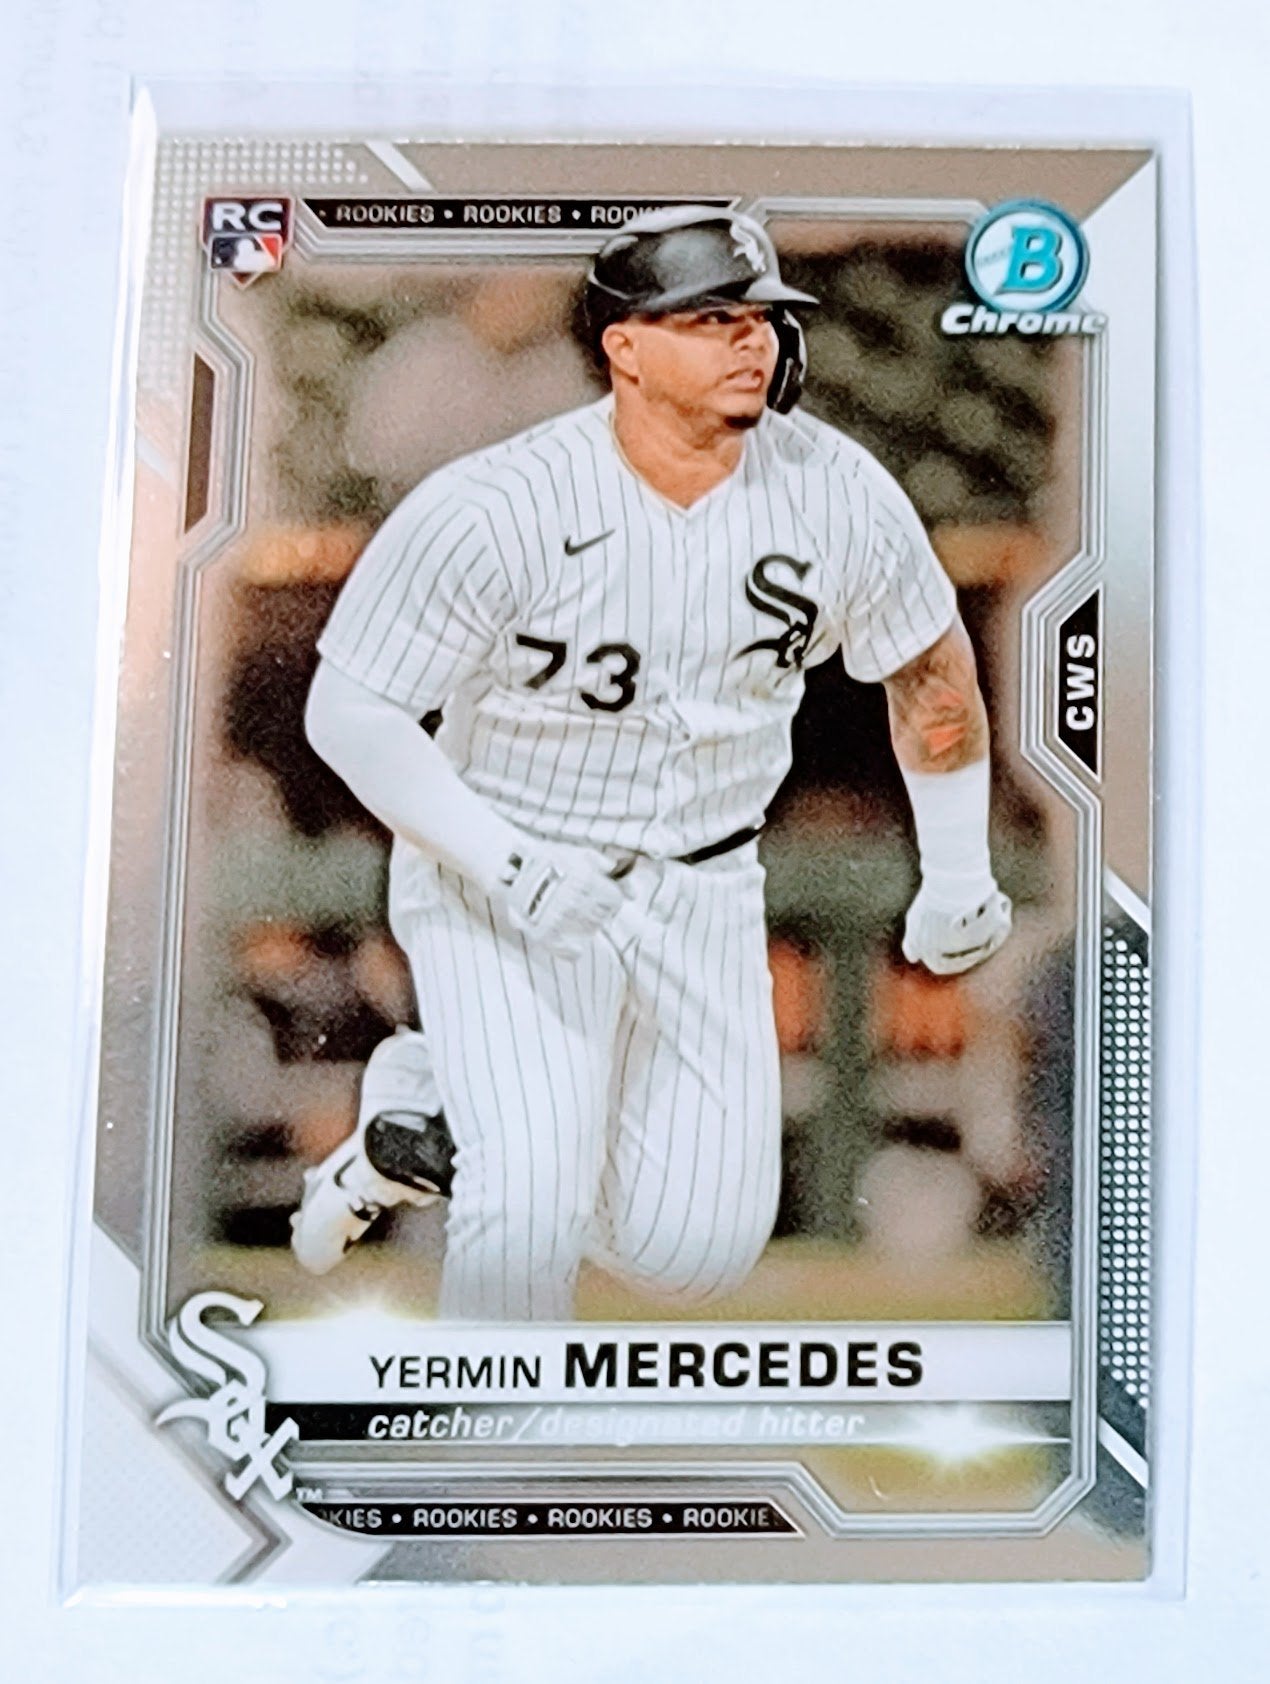 2021 Bowman Chrome Yermin Mercedes Rookie Baseball Trading Card SMCB1 simple Xclusive Collectibles   